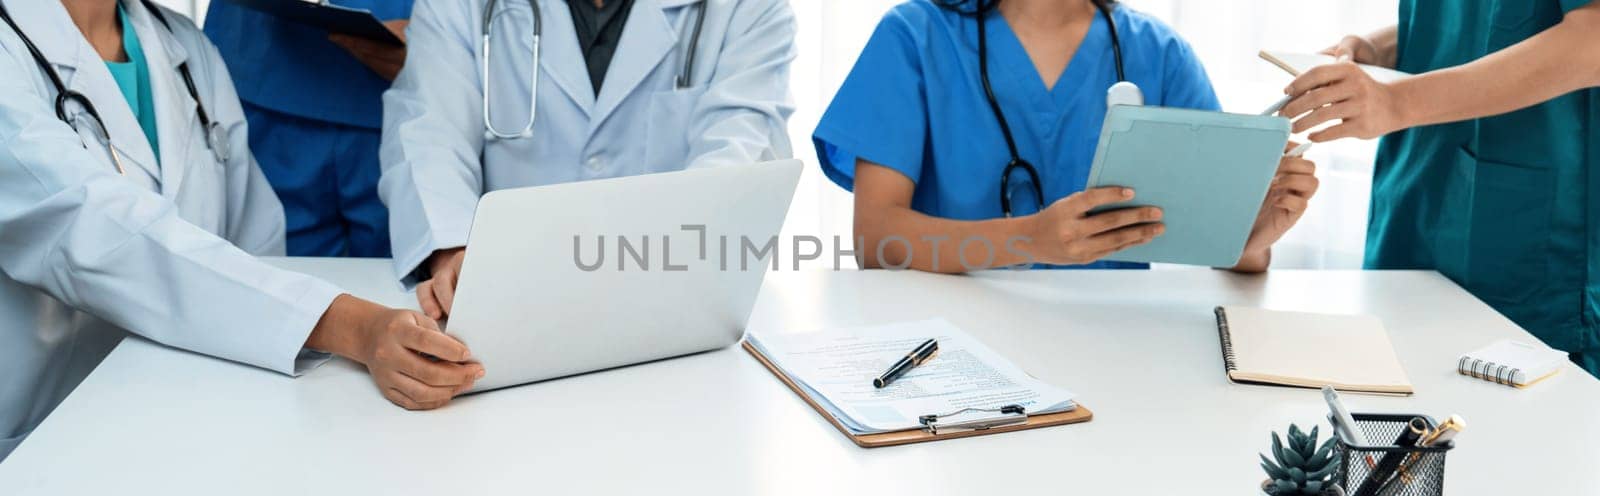 Professional various team of medical working and planning medical treatment at hospital table together. Teamwork lead to successful illness and sickness treatment. Panorama Rigid